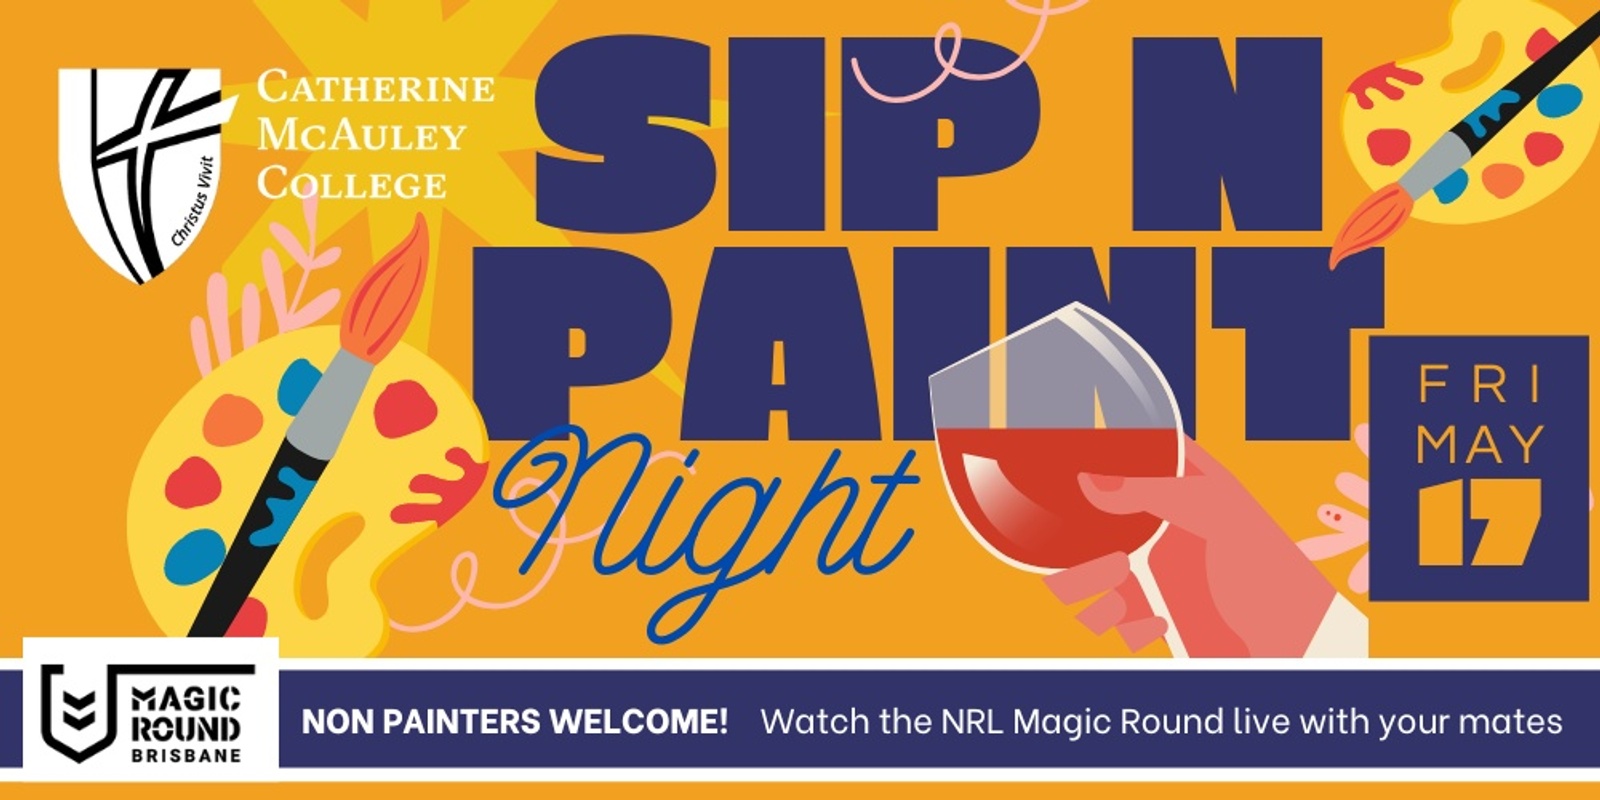 Banner image for Catherine McAuley College Sip & Paint Night